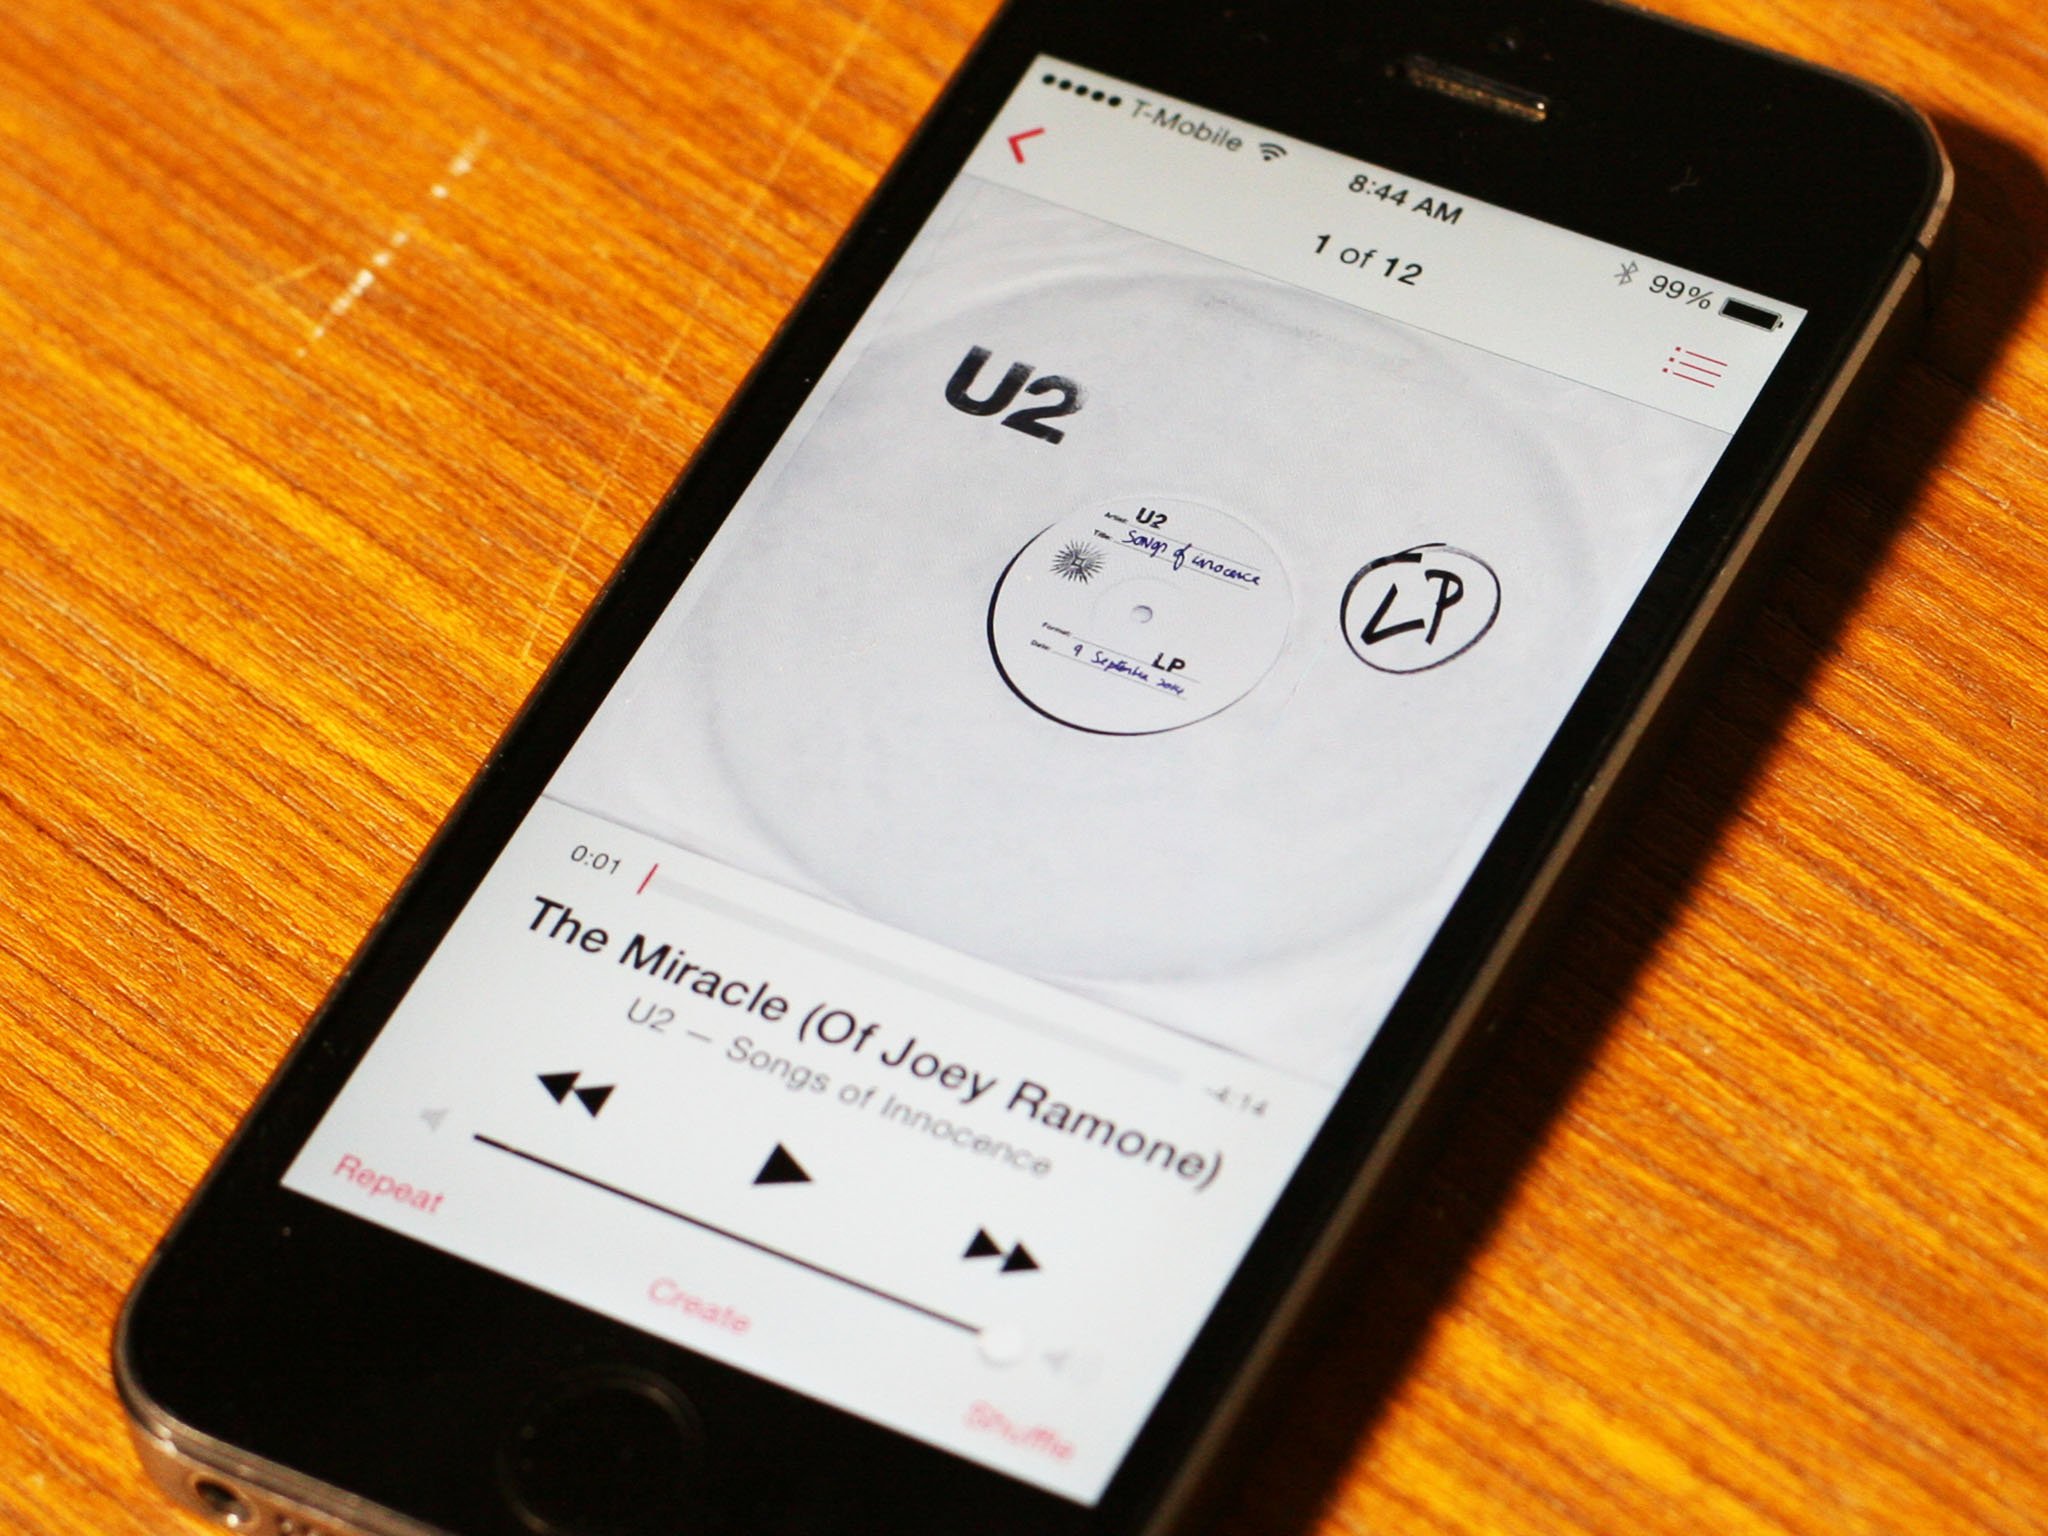 NSFW: Apple, U2 and looking a gift horse in the mouth